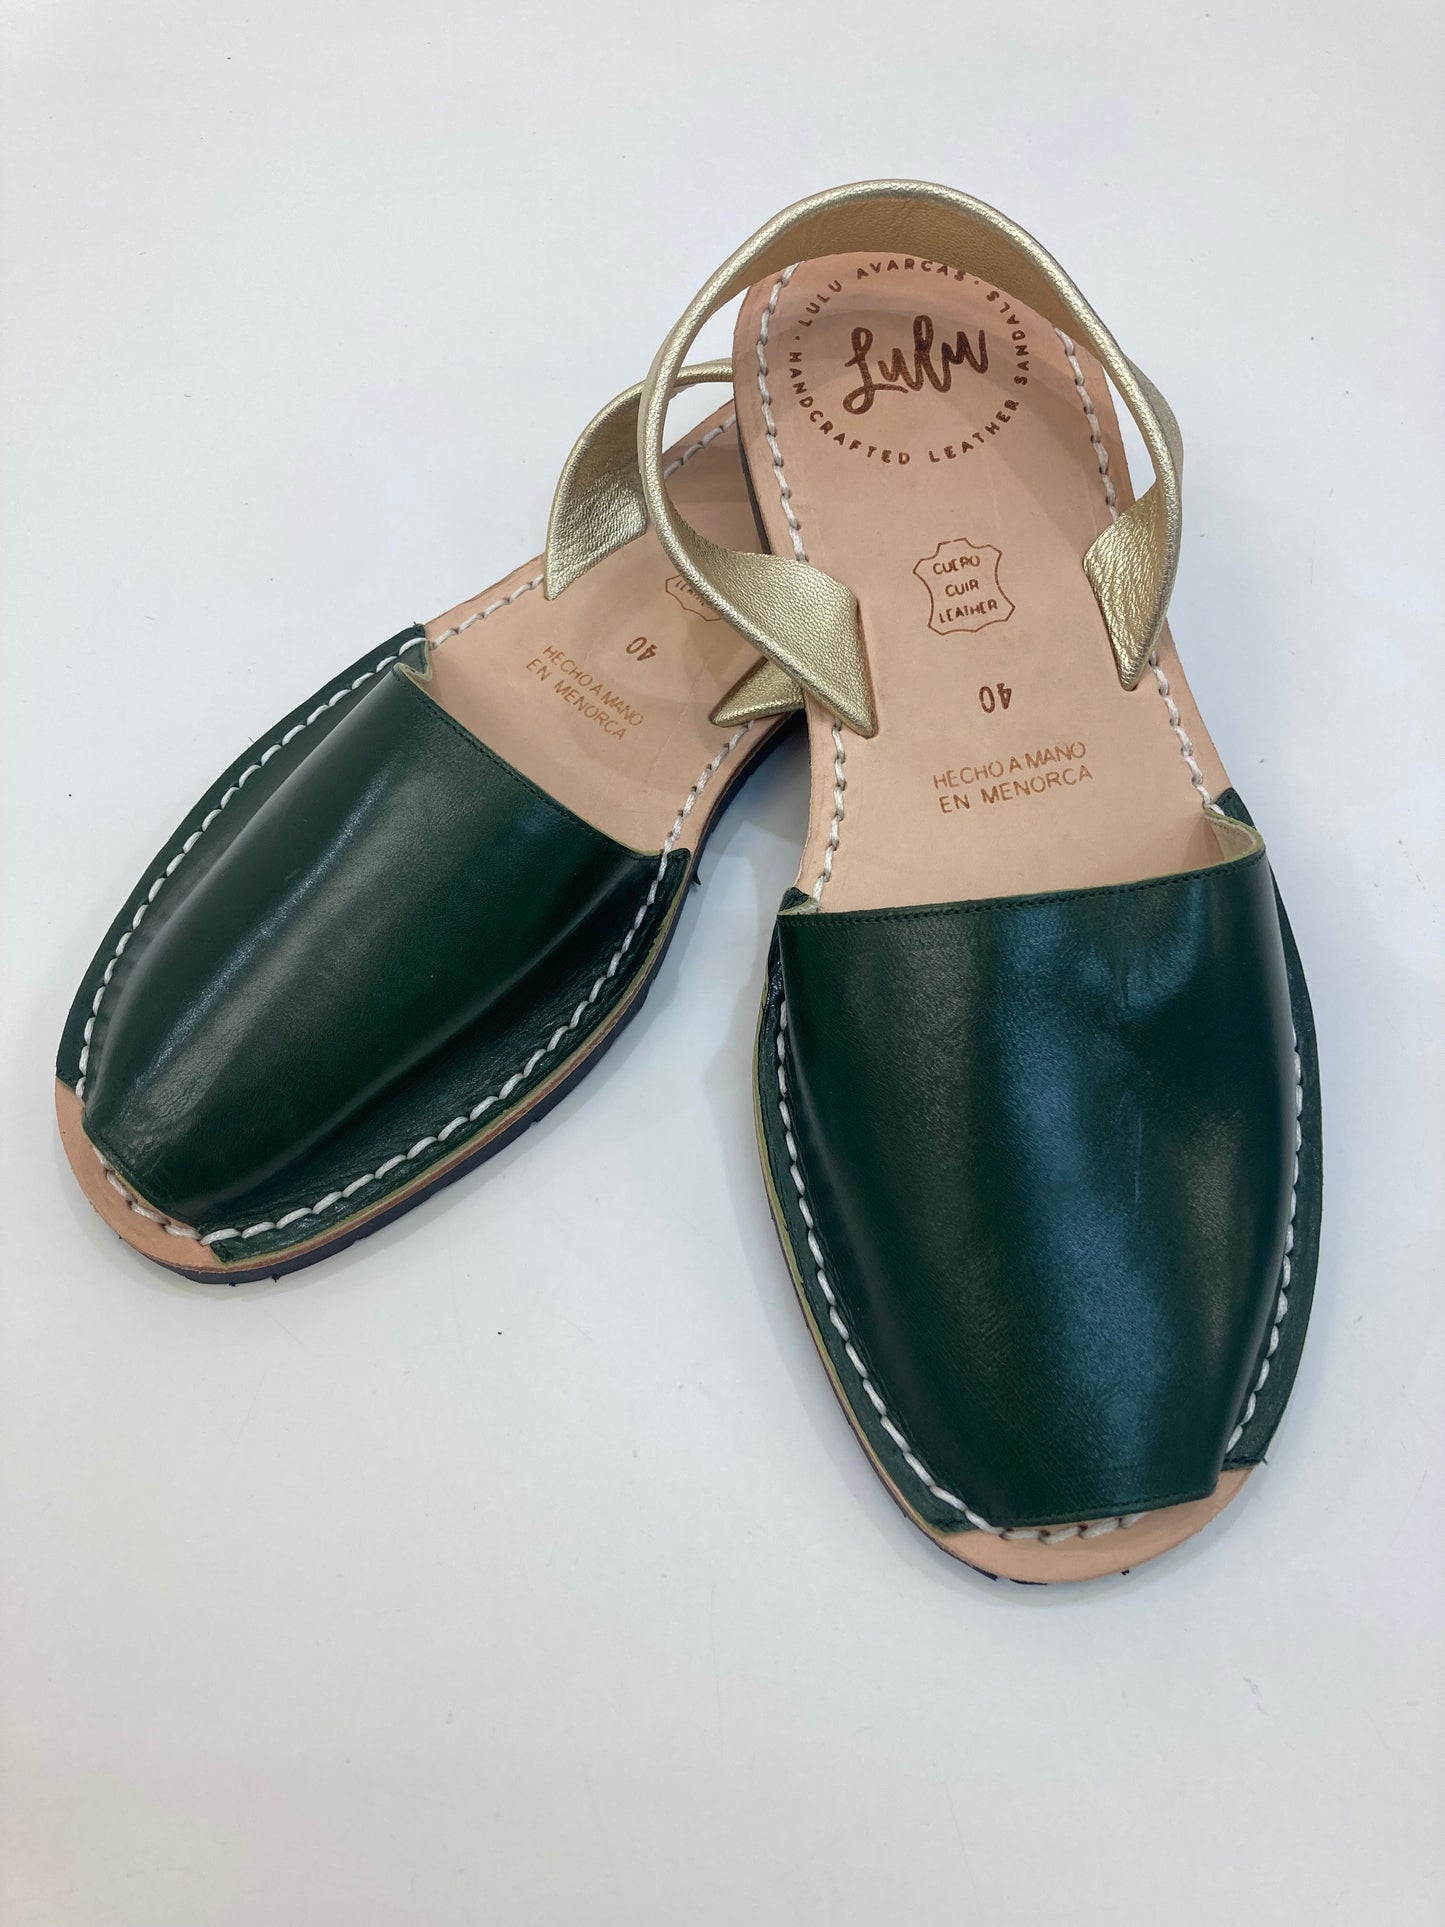 LULU AVARCAS FLAT IN FORREST GREEN WITH A GOLD STRAP